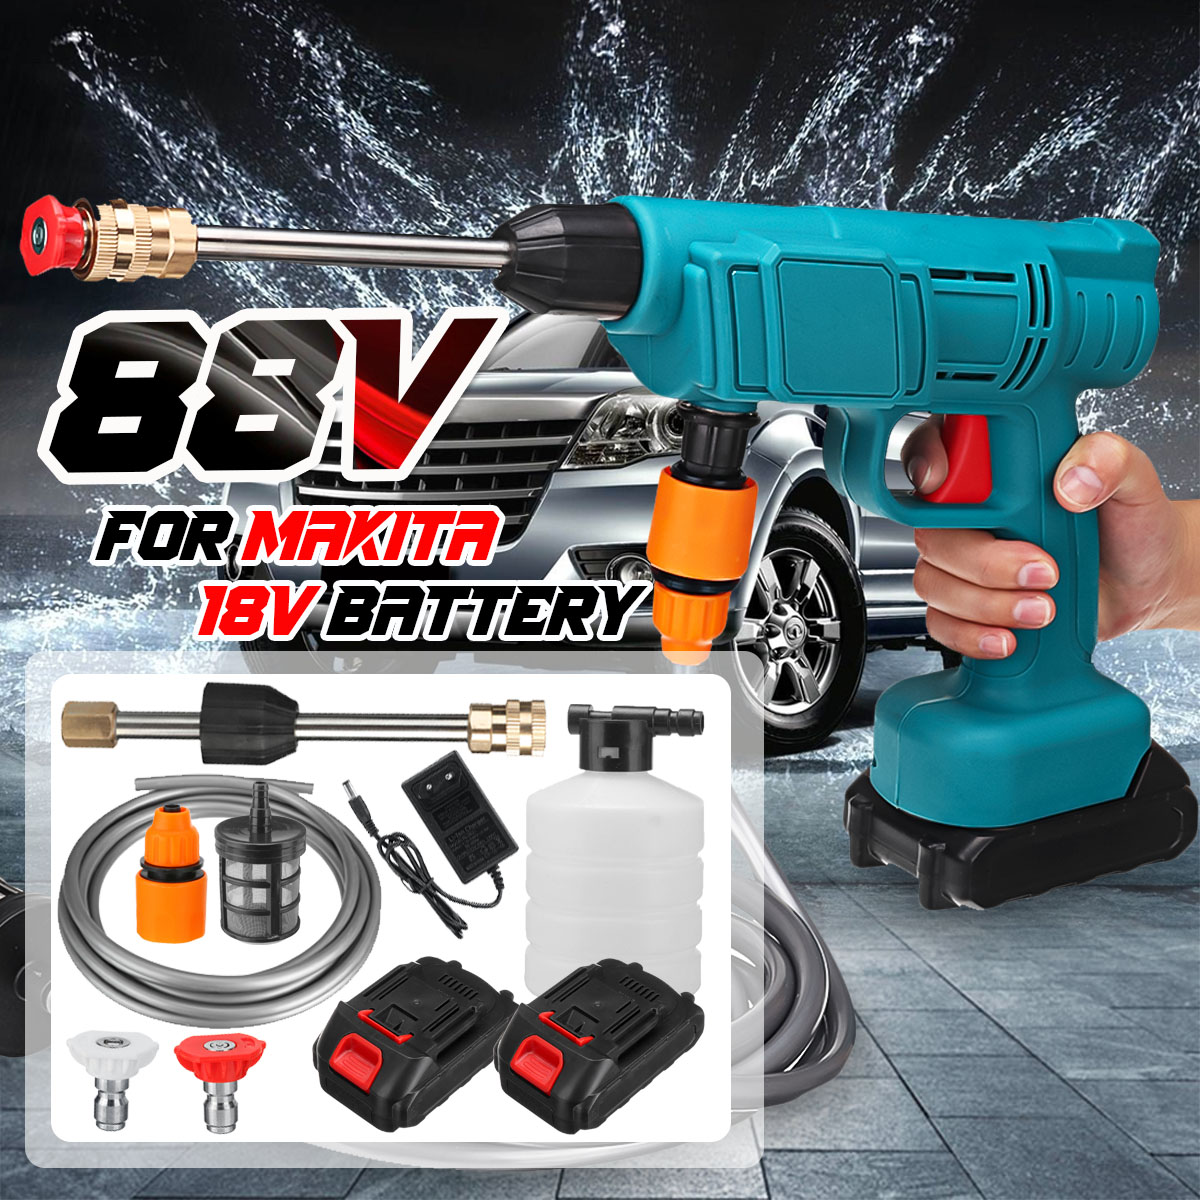 88VF-Cordless-High-Pressure-Washer-Car-Washing-Spray-Guns-Water-Cleaner-W-None12-Battery-For-Makita-1875161-1